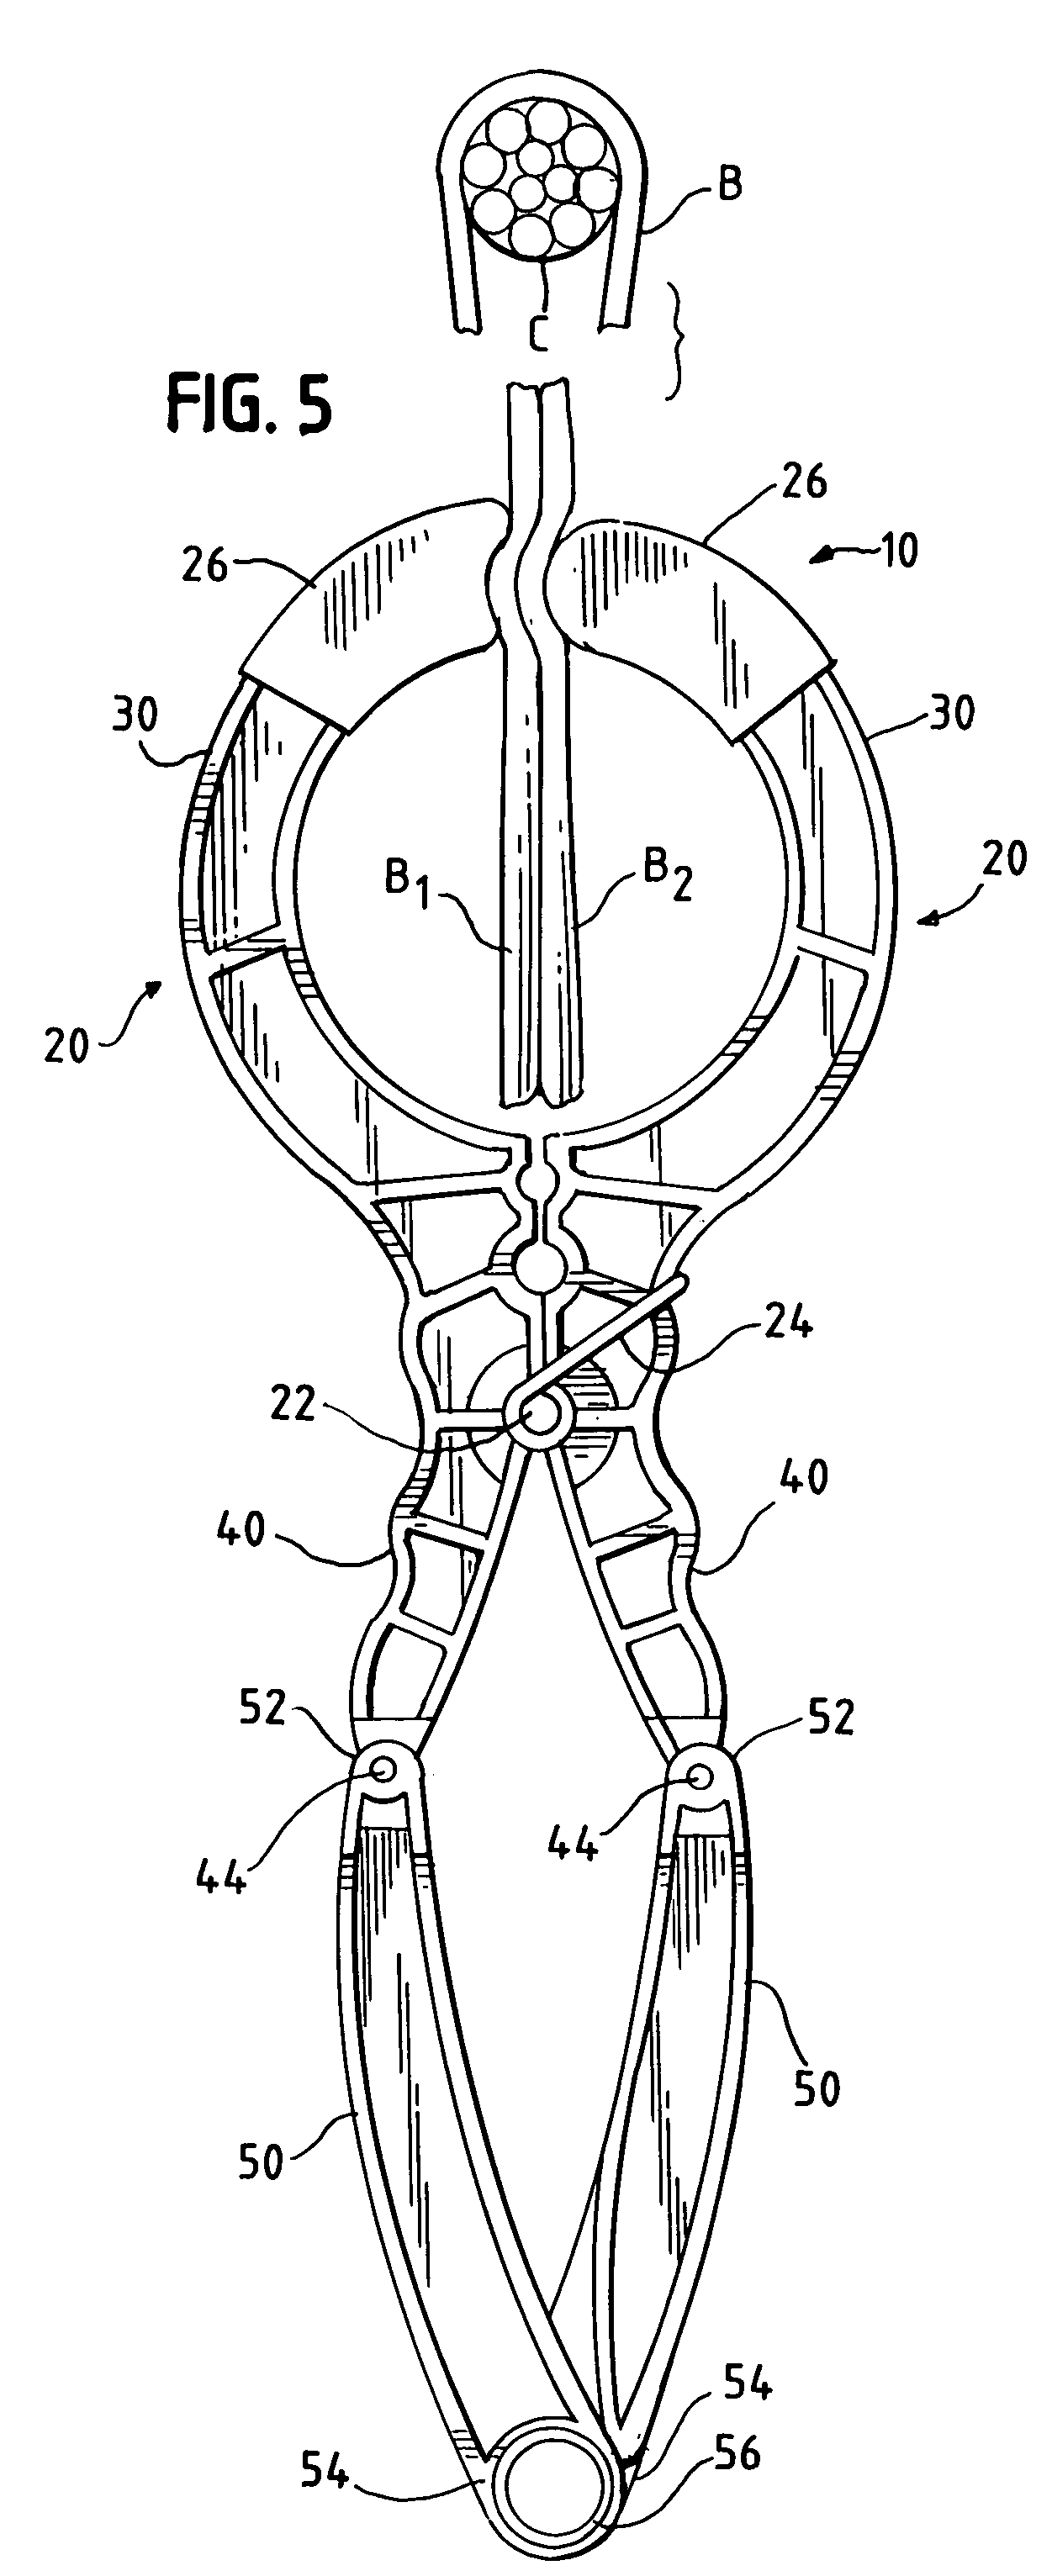 Clamp pin for use by electrician or electrical lineworker